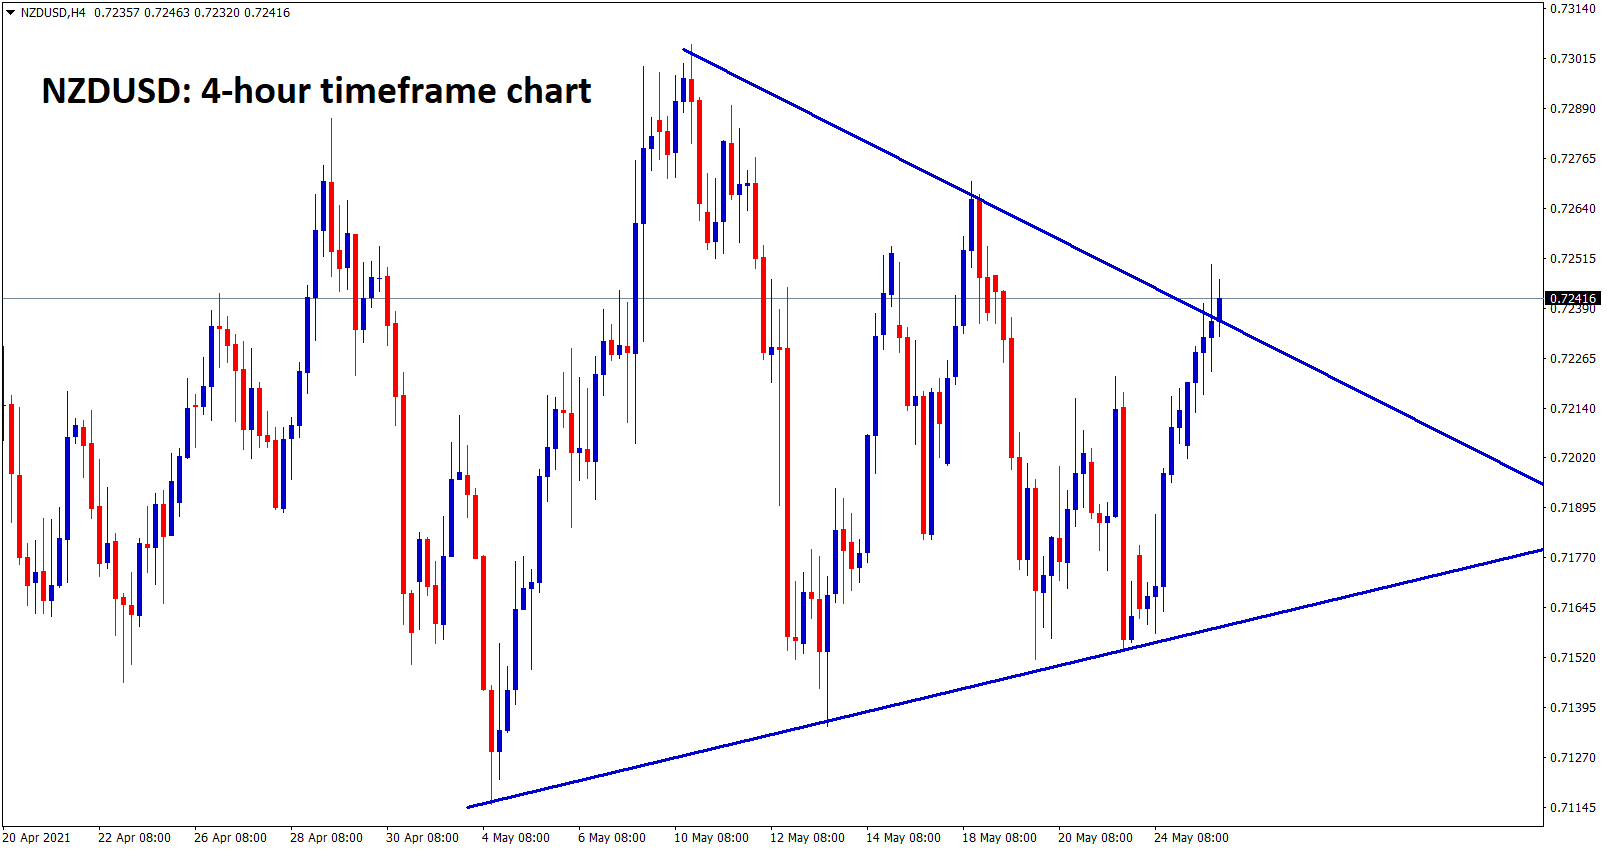 NZDUSD is trying to break the top level of the symmetrical triangle pattern in H4 chart